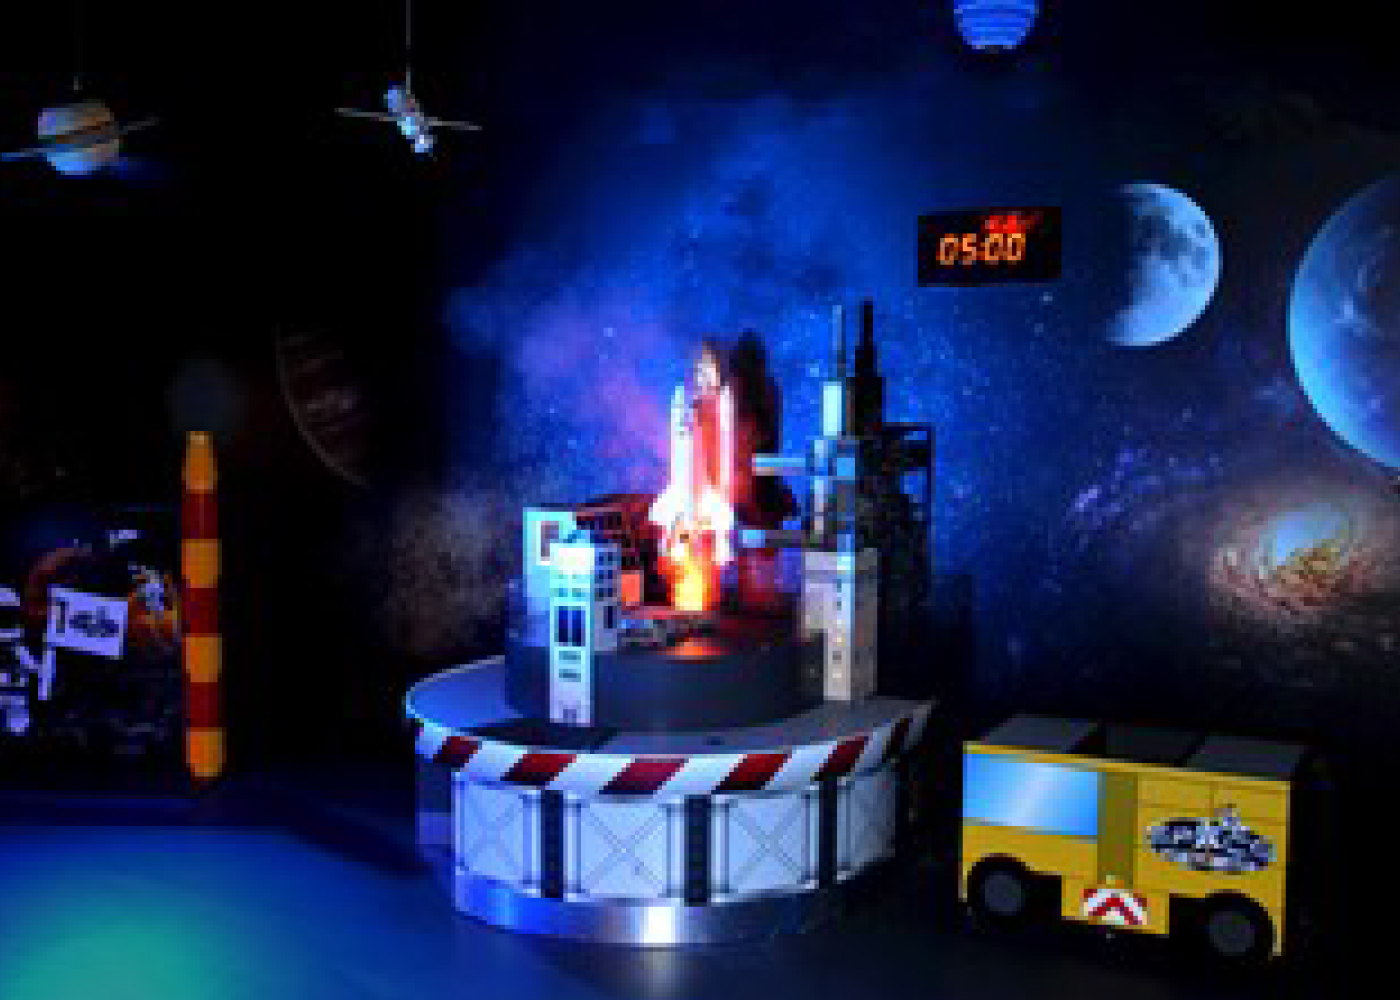 Space Mission at LEGOLAND Discovery Center